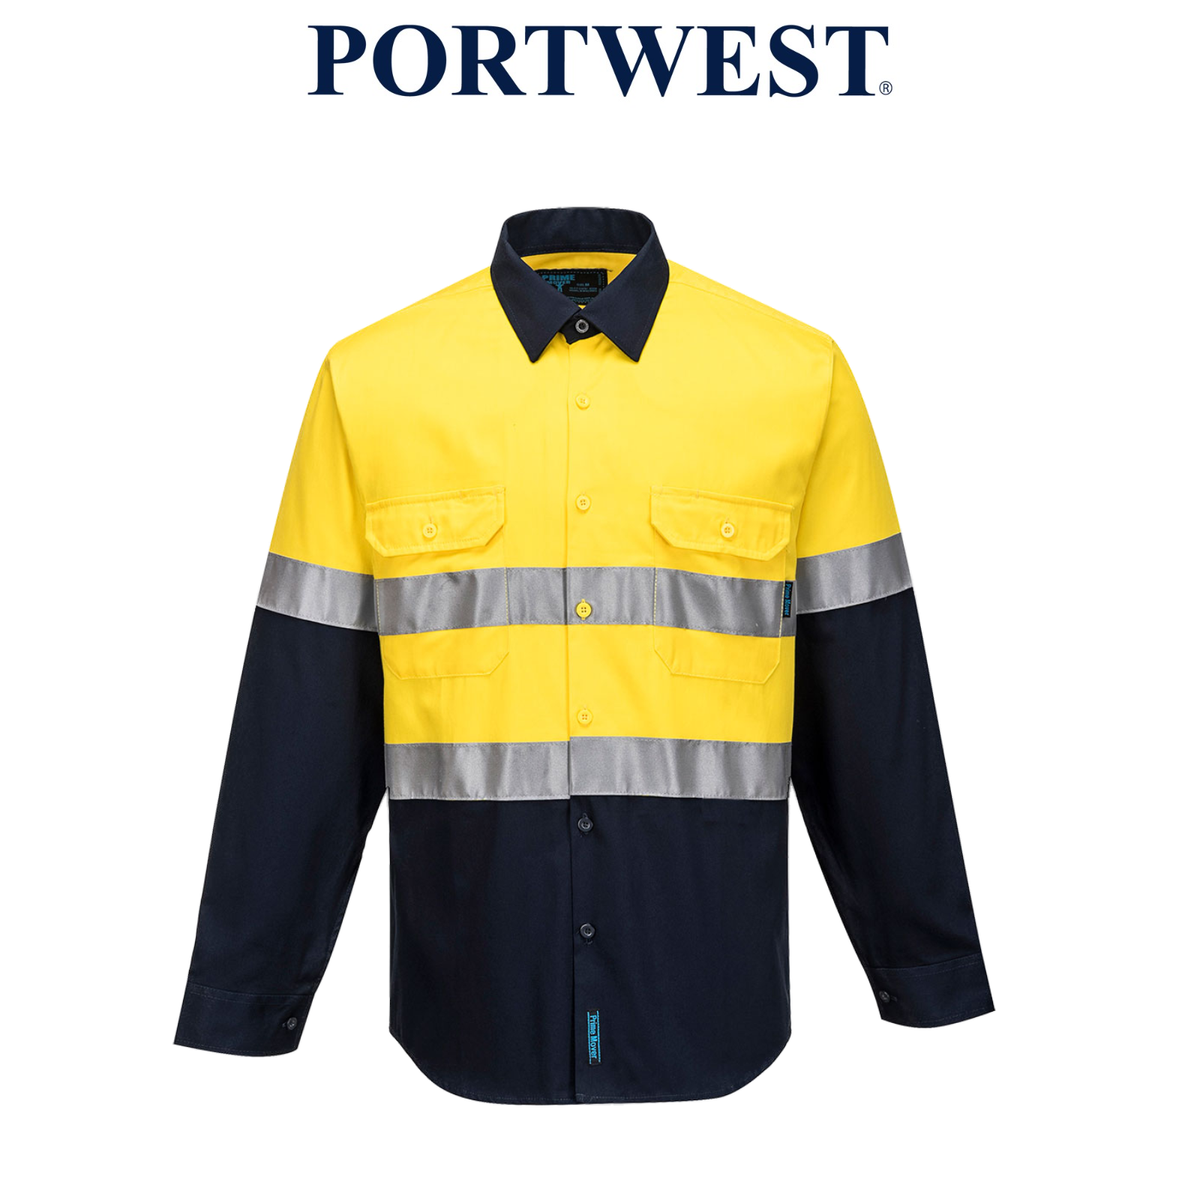 Portwest Mens Prime Mover Work Hi-Vis Two Cotton Reflective Shirt Taped MA101